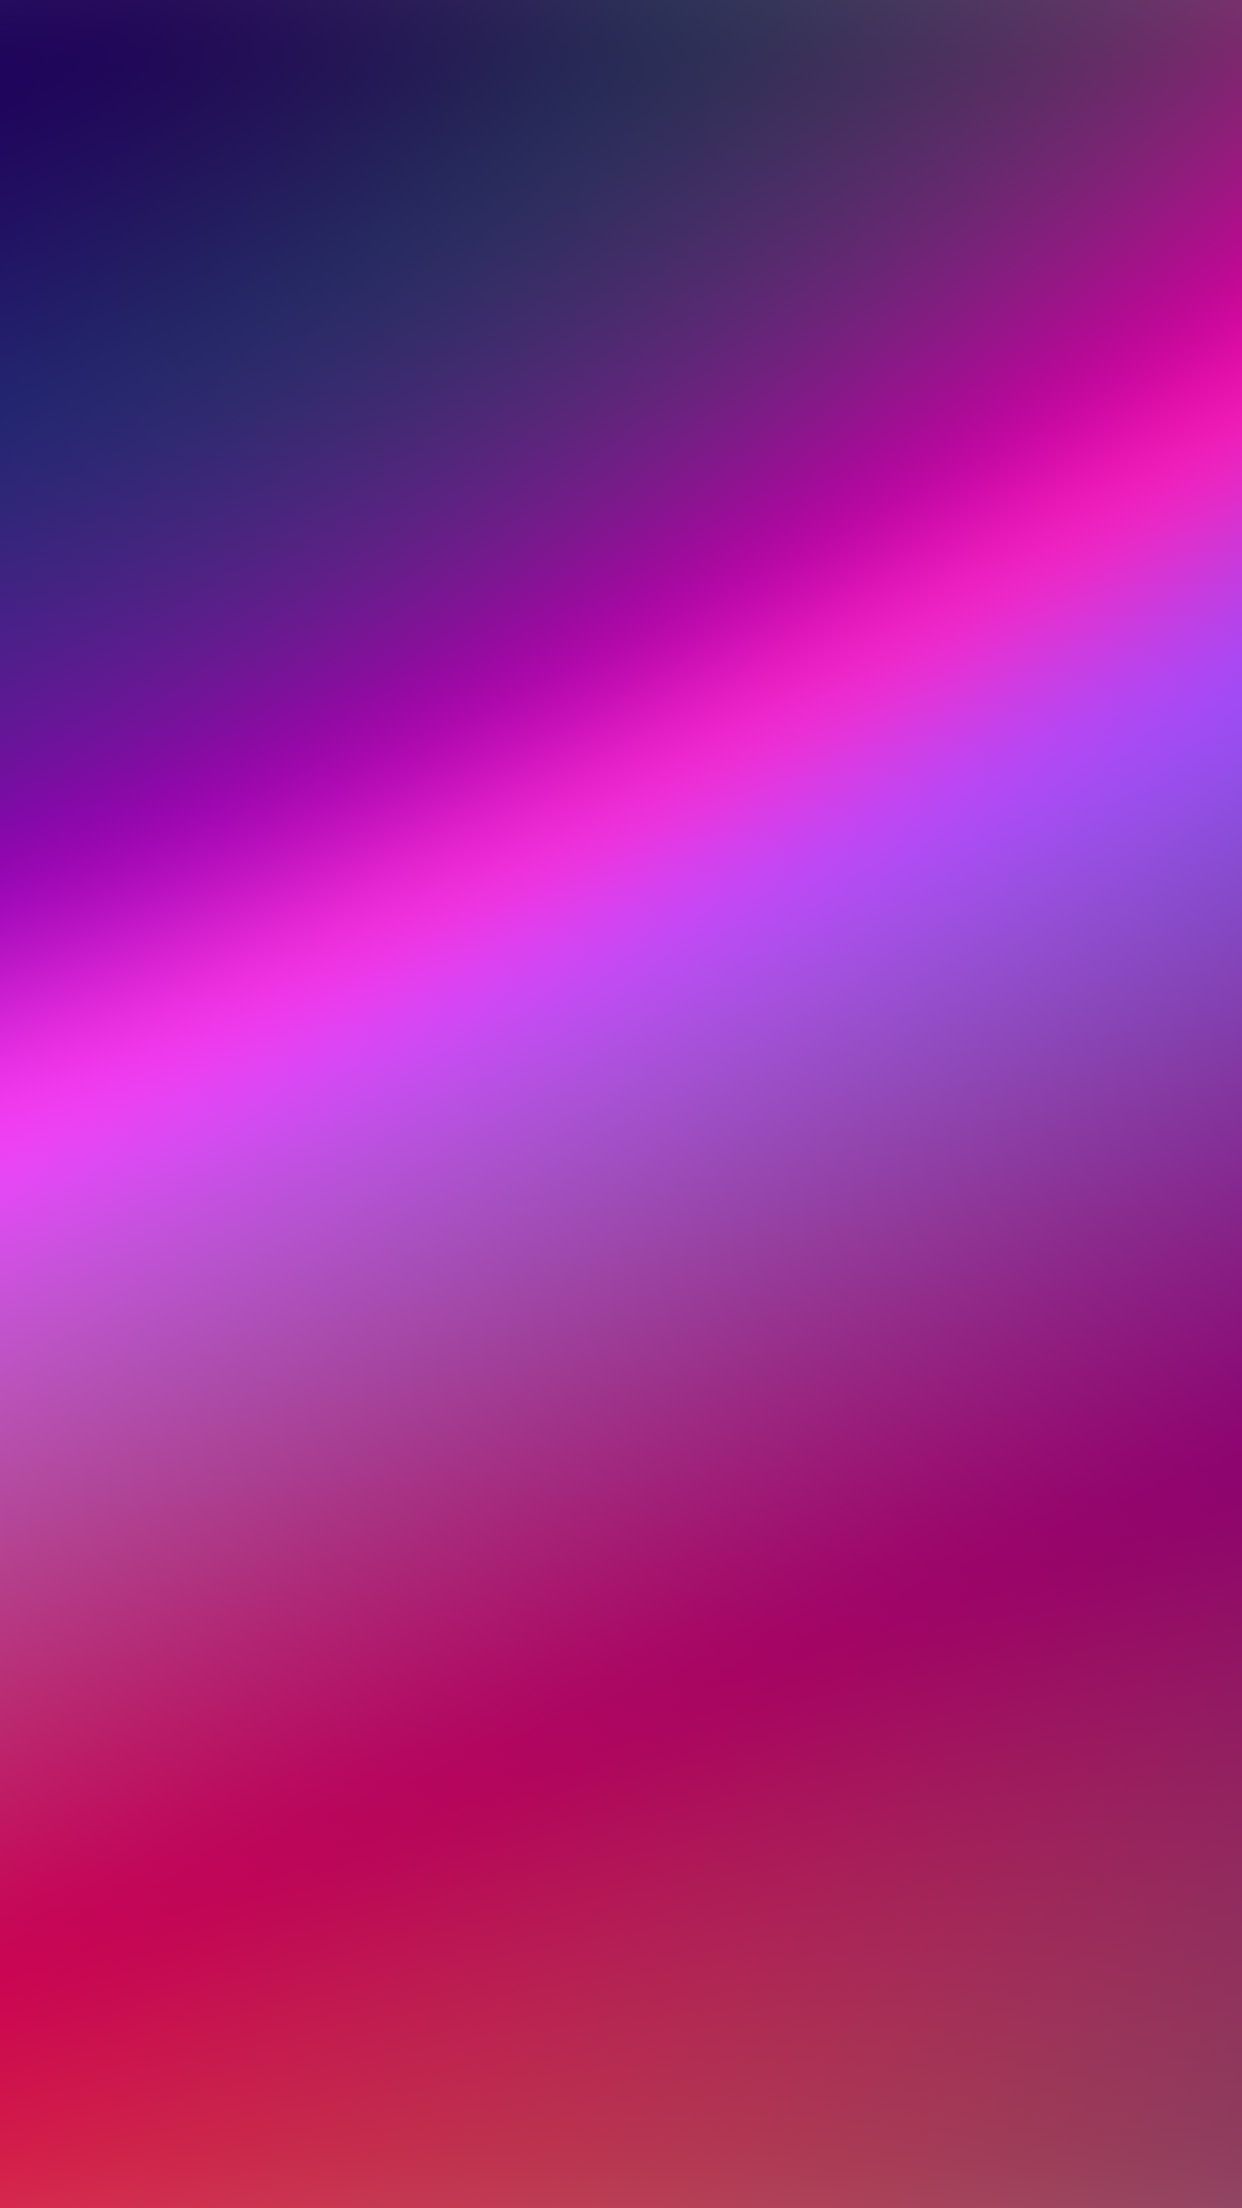 Red hot pink blur gradation Download Free HD Wallpapers for iPhone